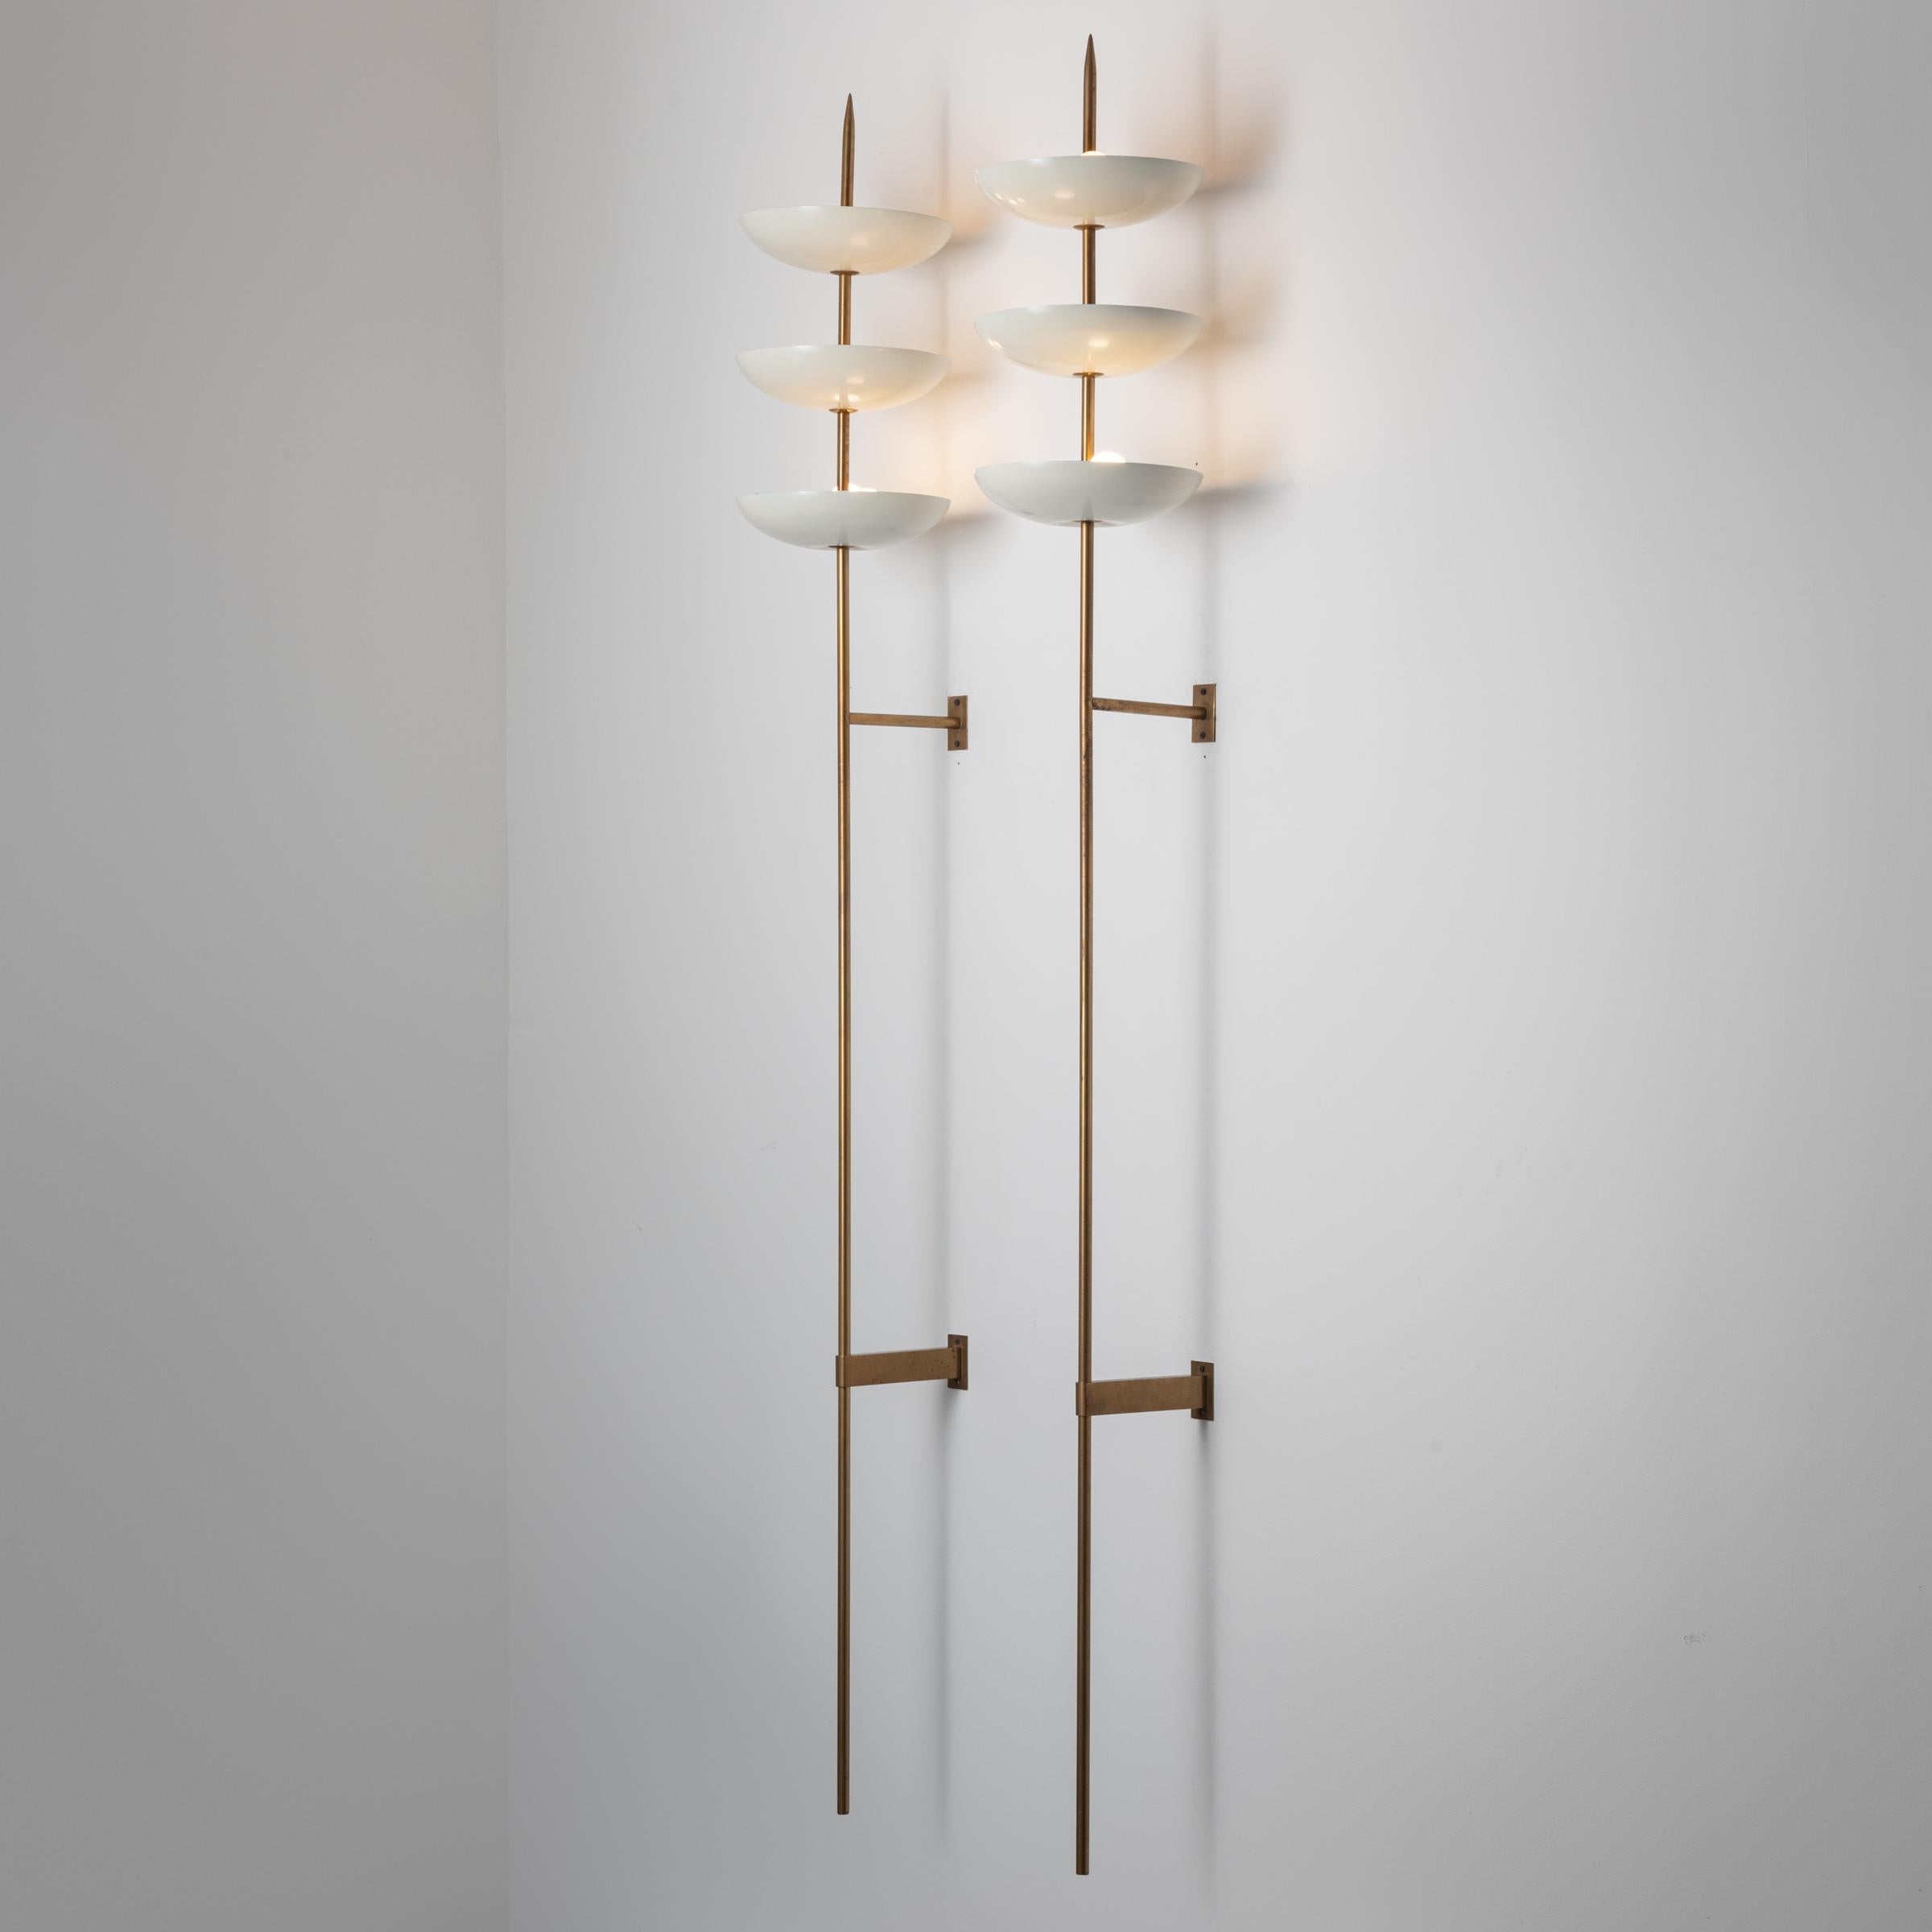 Single wall light by Stilnovo. Manufactured in Italy, circa 1950's. Painted metal, brass. Wired for U.S. standards. We recommend three E14 6ow maxim candelabra bulbs per fixture. Bulbs not included. Priced and sold individually, not as a pair.
QTY: